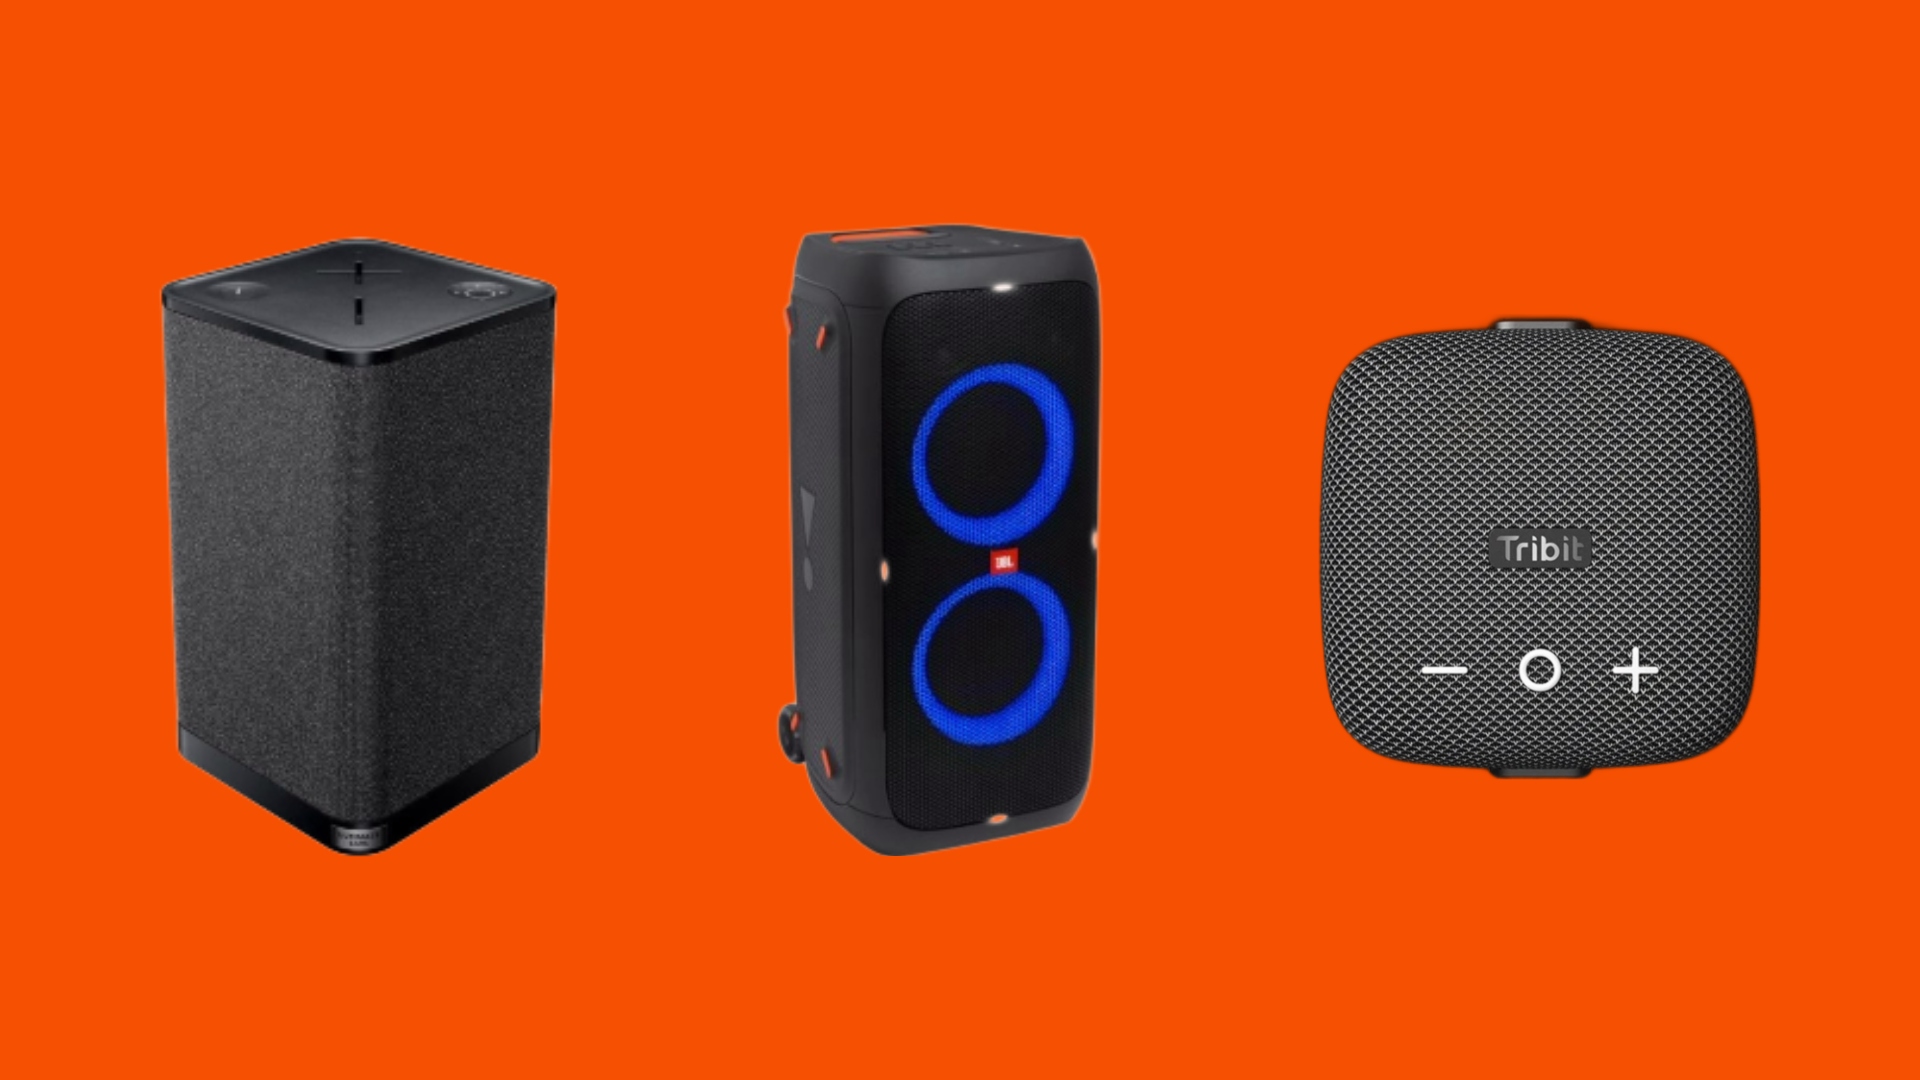 Three of the best Bluetooth speakers arranged in a row on an orange background